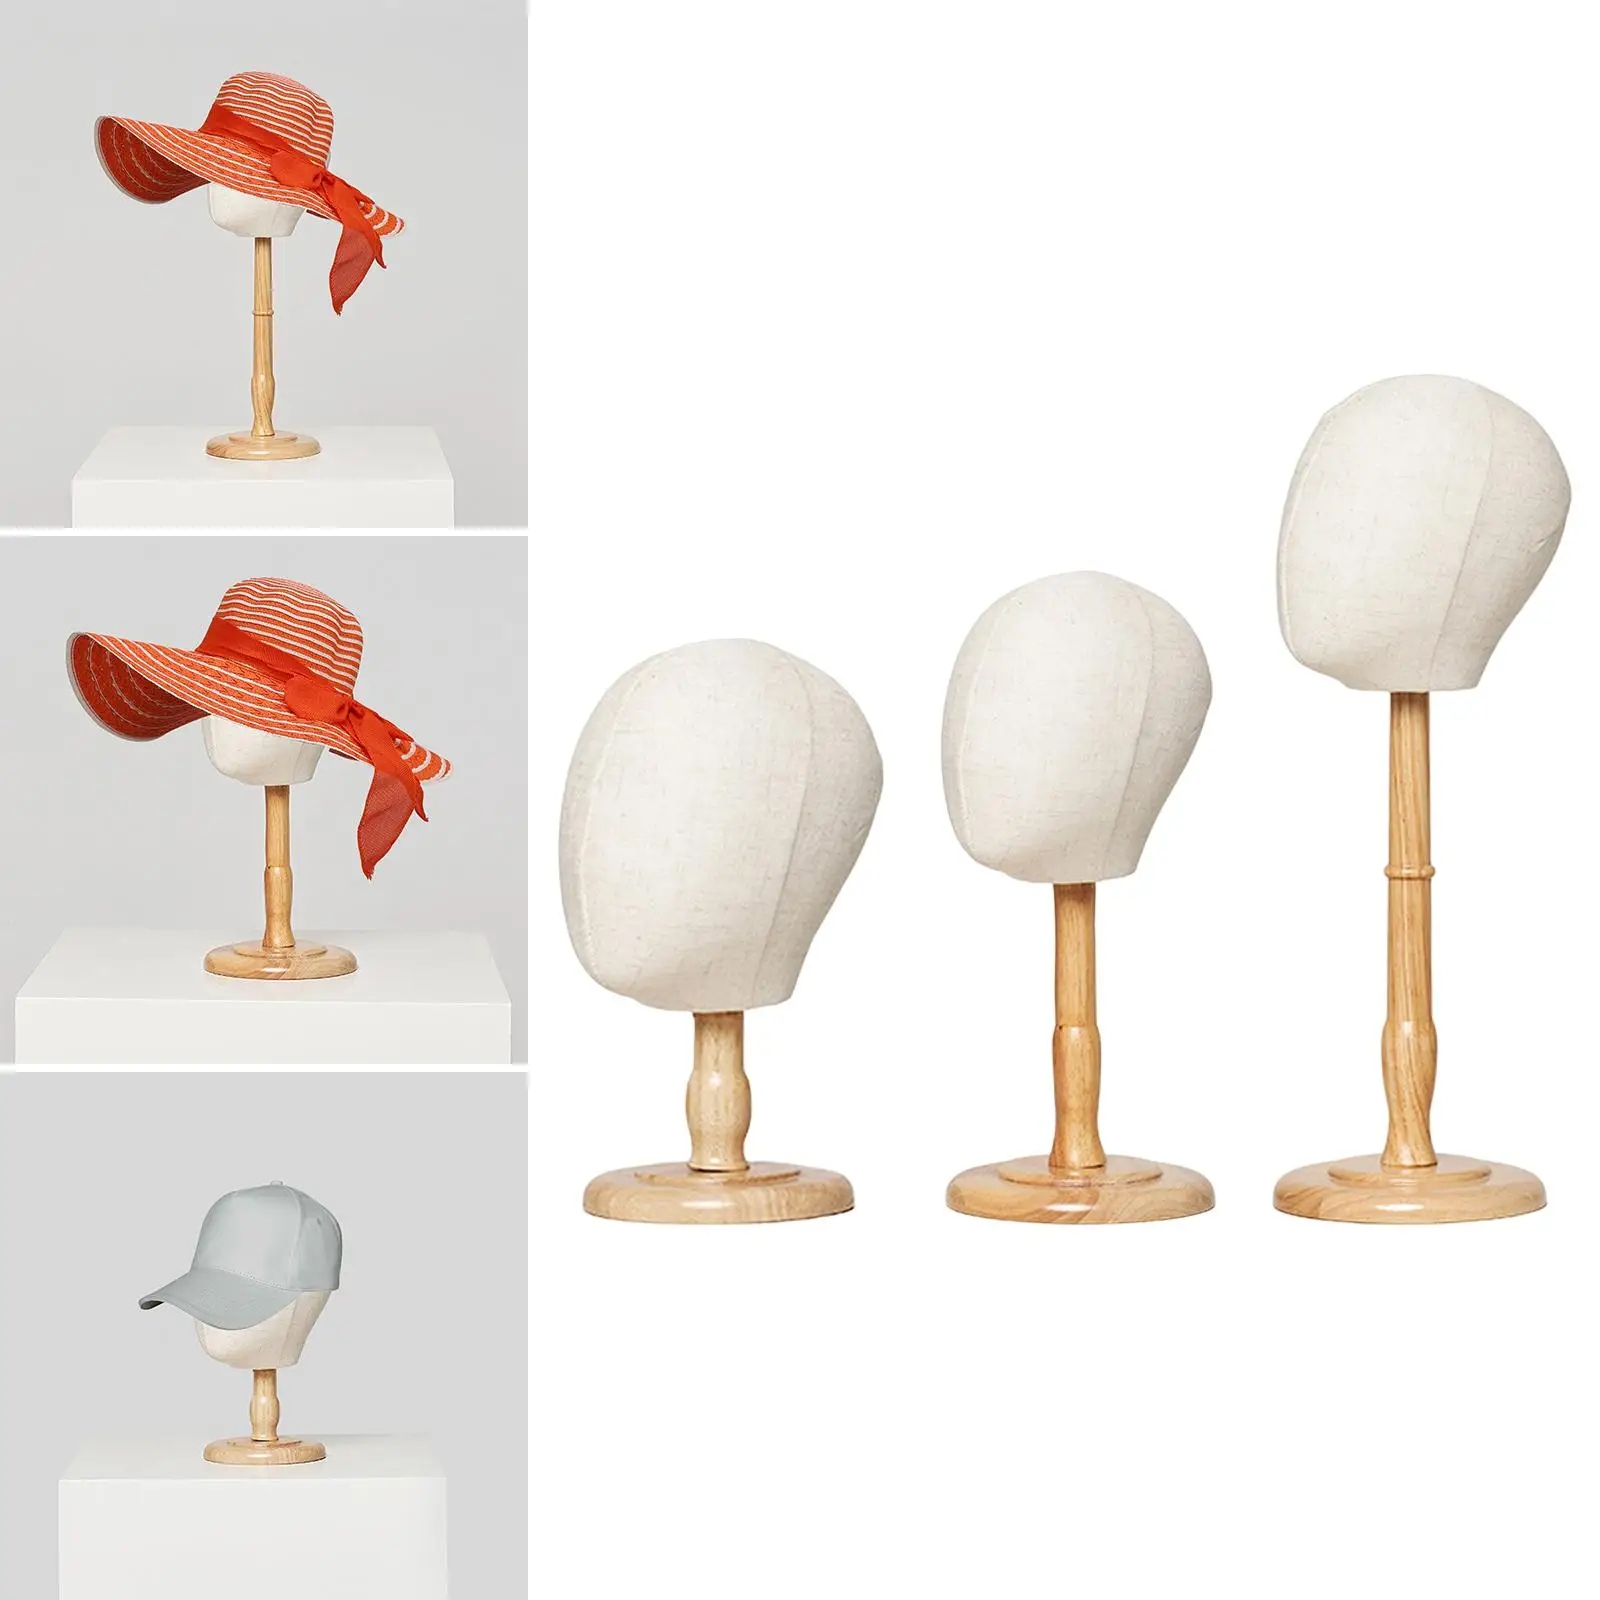 Hat Head Display Stable Sturdy Freestanding Kid Manikin Head Model for Hairdresser Training Home Salon Styling Drying Decoration